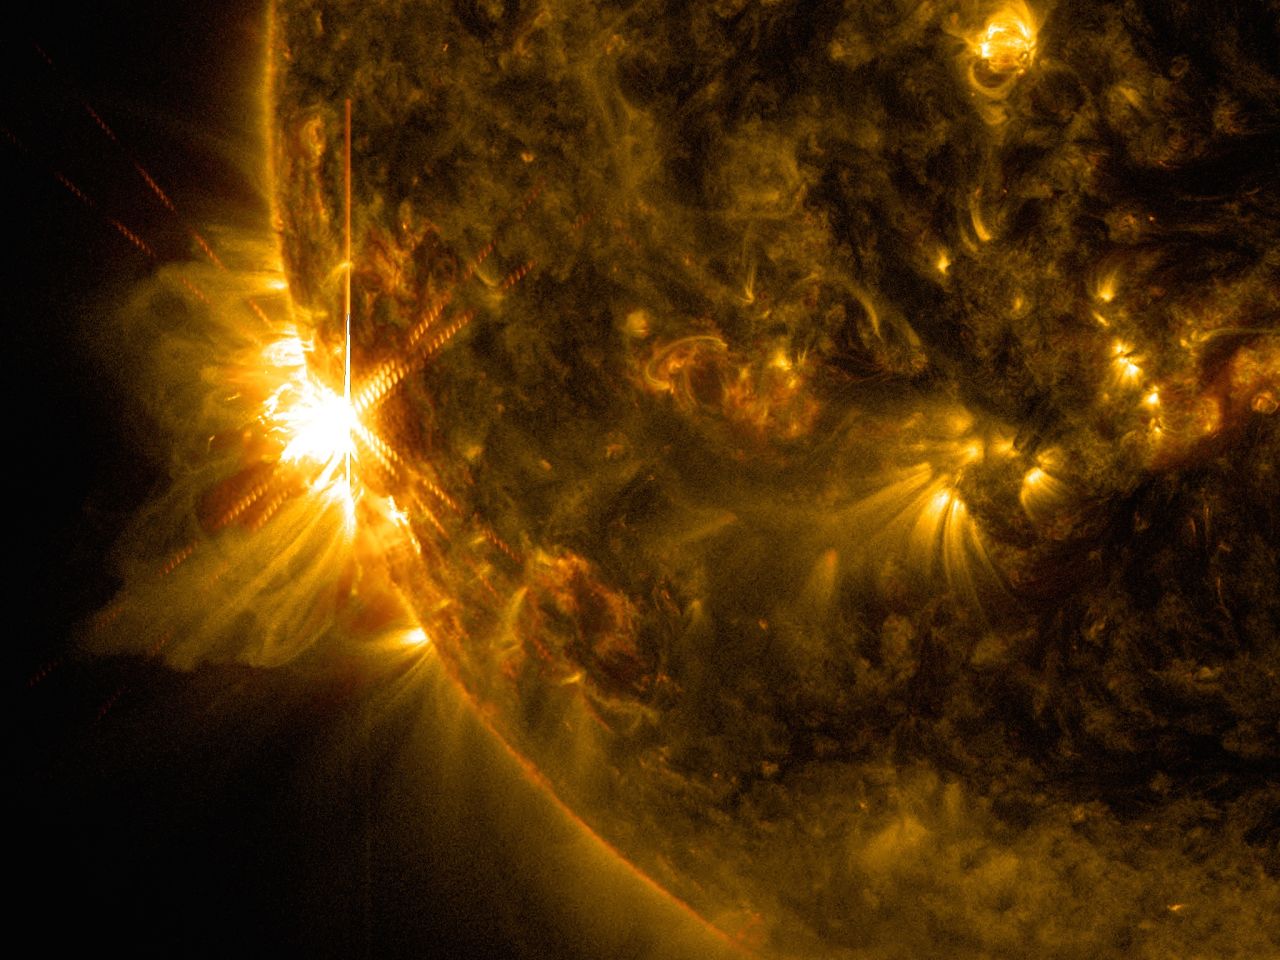 NASA's Solar Dynamics Observatory, which observes the sun 24 hours a day, captured this image of a solar flare on June 10, 2014.  